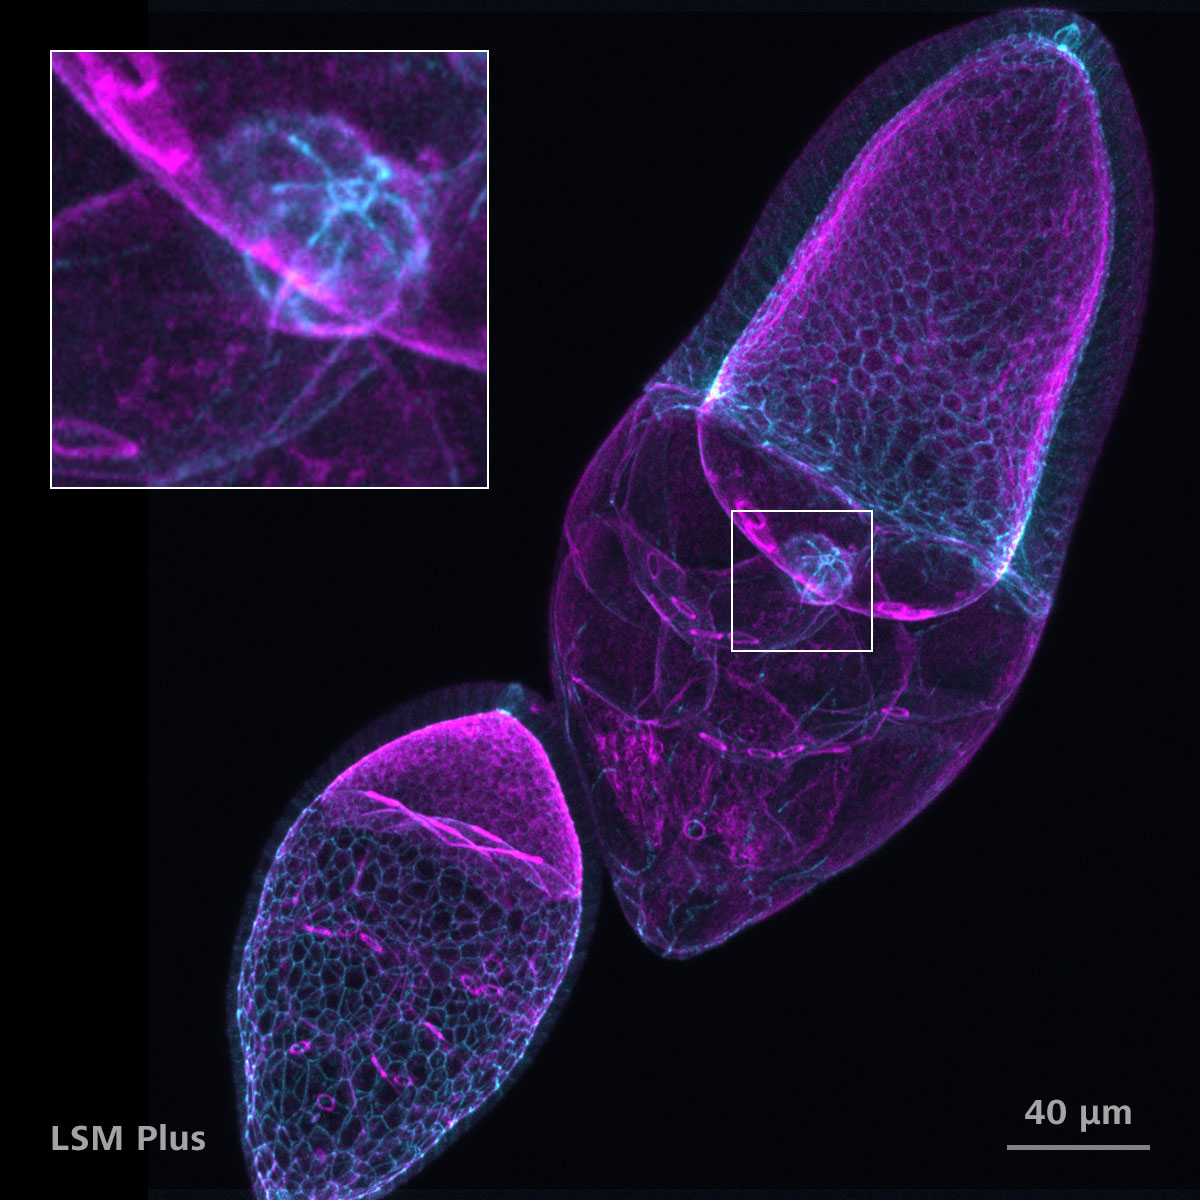 Drosophila egg chambers stained for F-actin (Phalloidin, magenta) and DE-Cadherin (cyan). Courtesy of T. Jacobs, AG Luschnig, WWU Münster; with T. Zobel, Münster Imaging Network, Germany